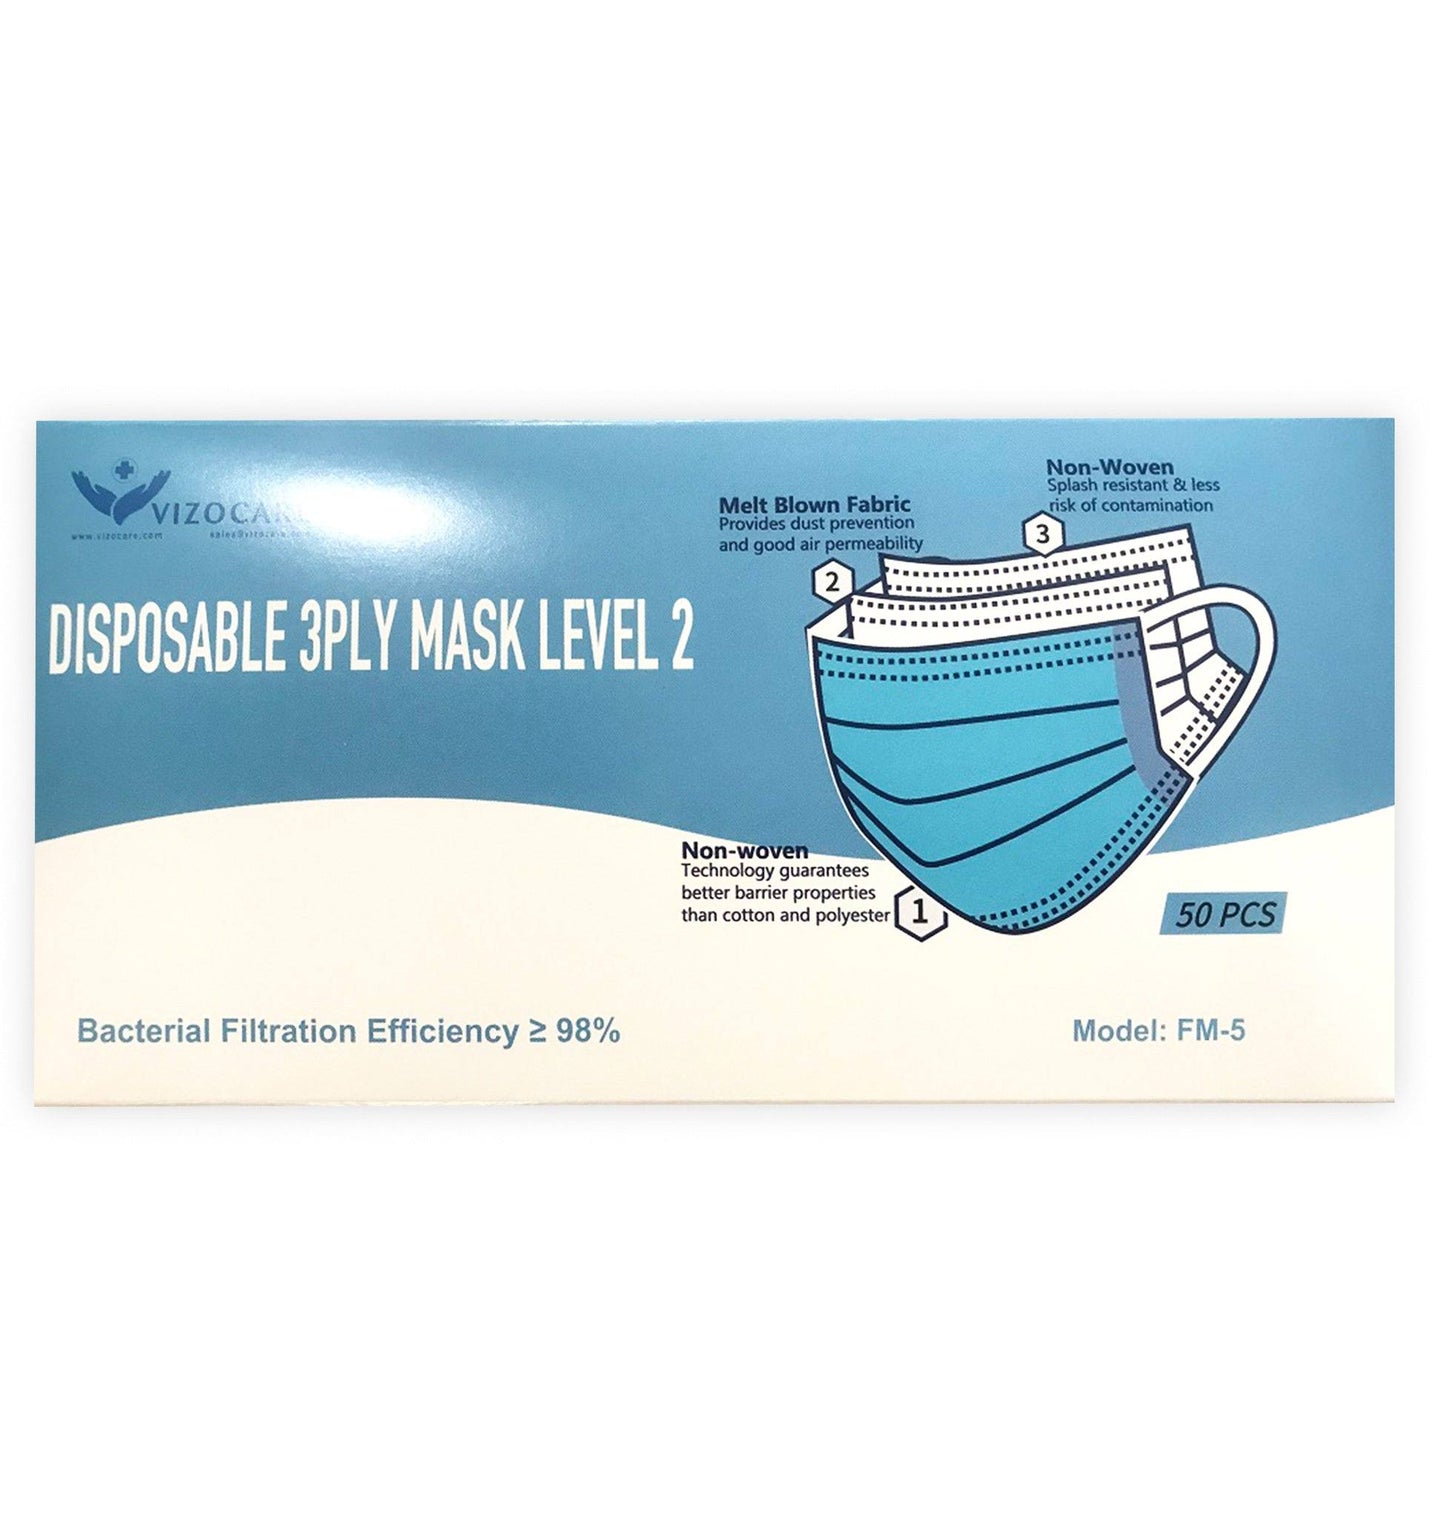 Disposable Surgical Mask, Level-2 3-Ply - pack of 50 (FM-5) Face Masks Vizocom 